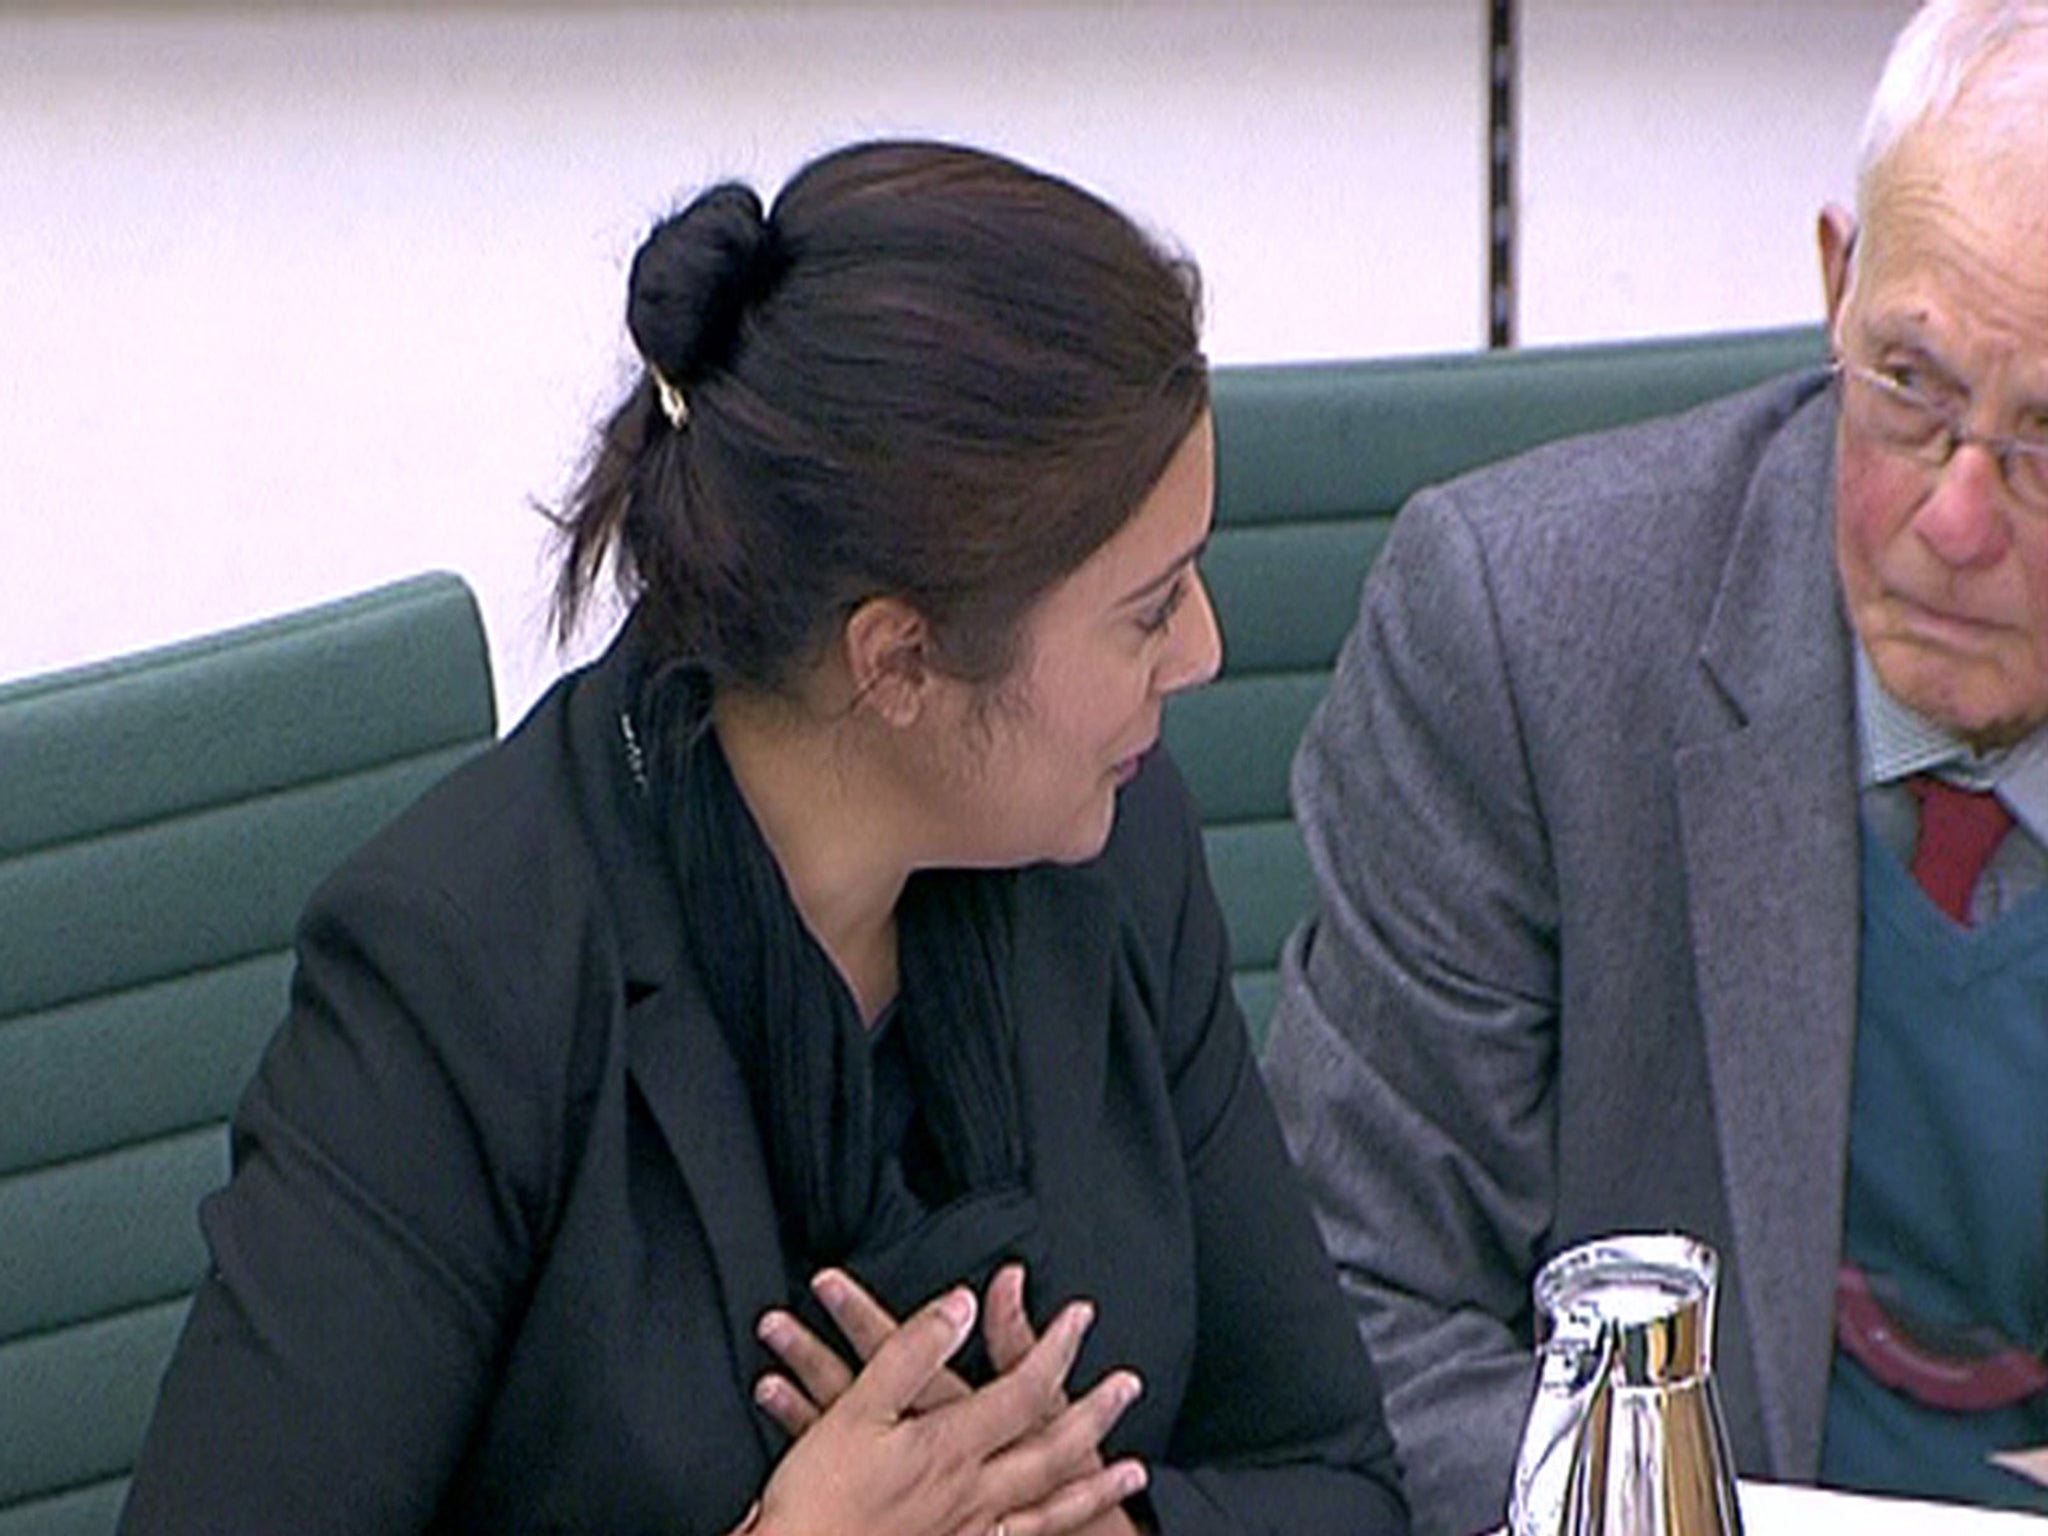 Conservative MP Nusrat Ghani attending a Home Affairs Select Committee hearing in Portcullis House, London